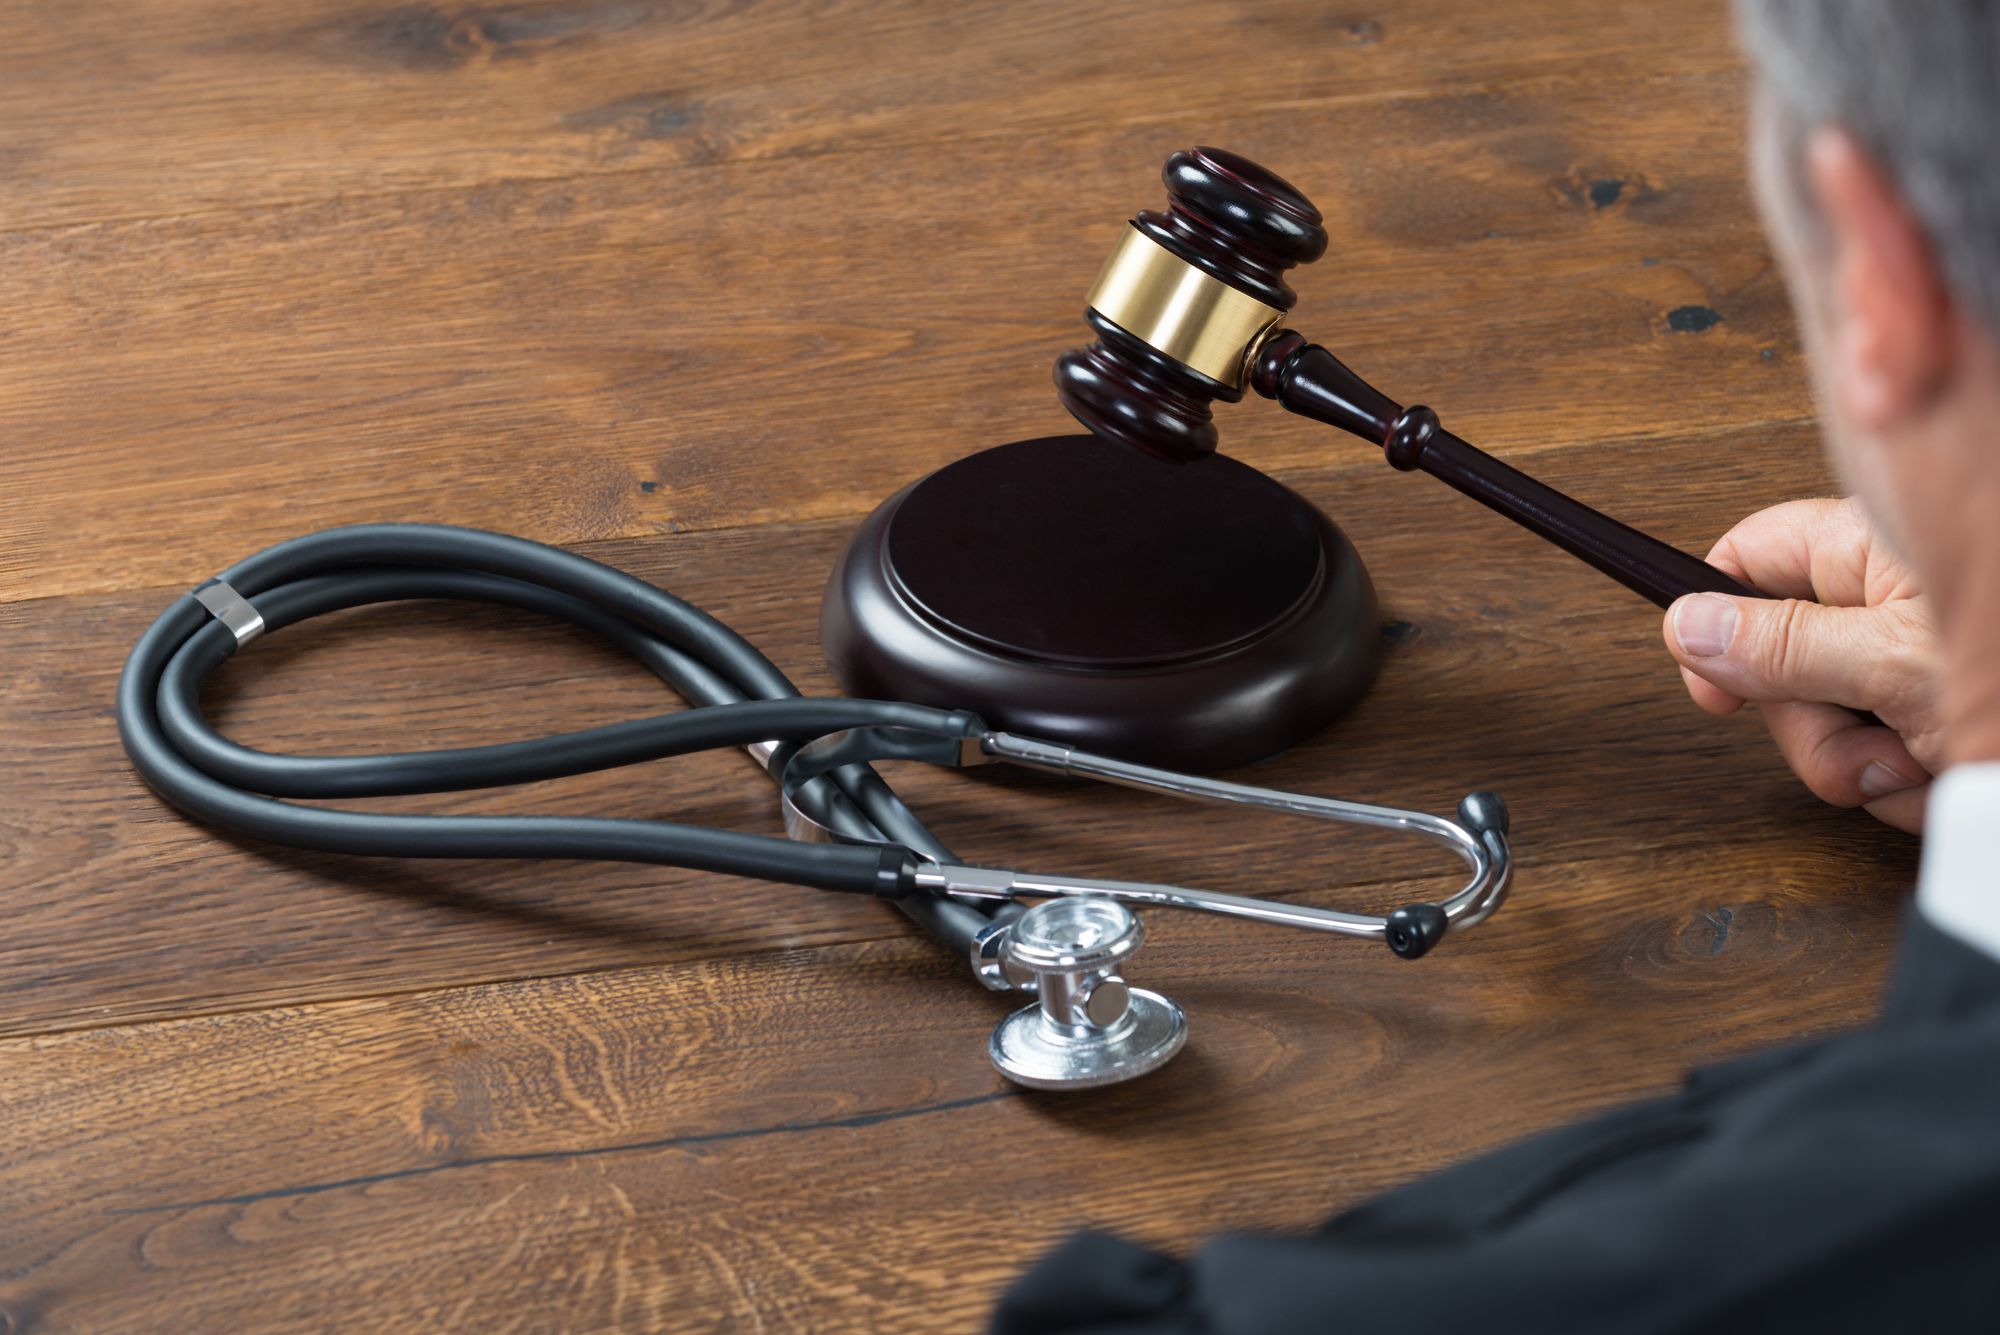 Judge Hitting Gavel With Stethoscope In Courtroom